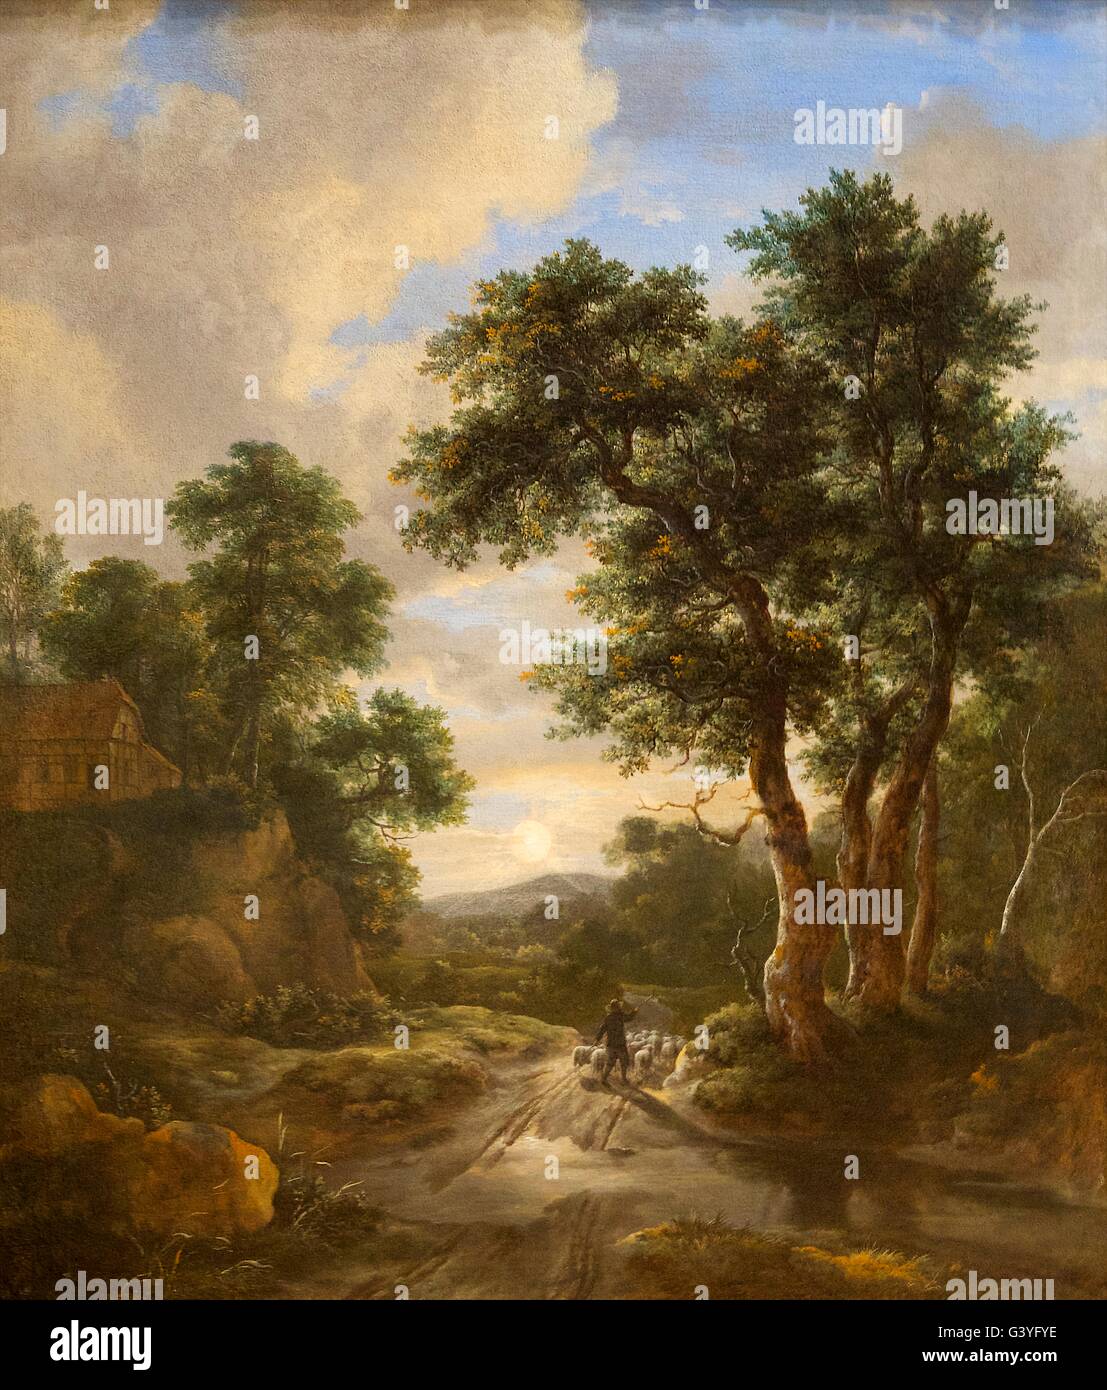 Sunrise in a Wood, by Jacob van Ruisdael, 1670's,  Wallace Collection, London, England, UK, GB Stock Photo